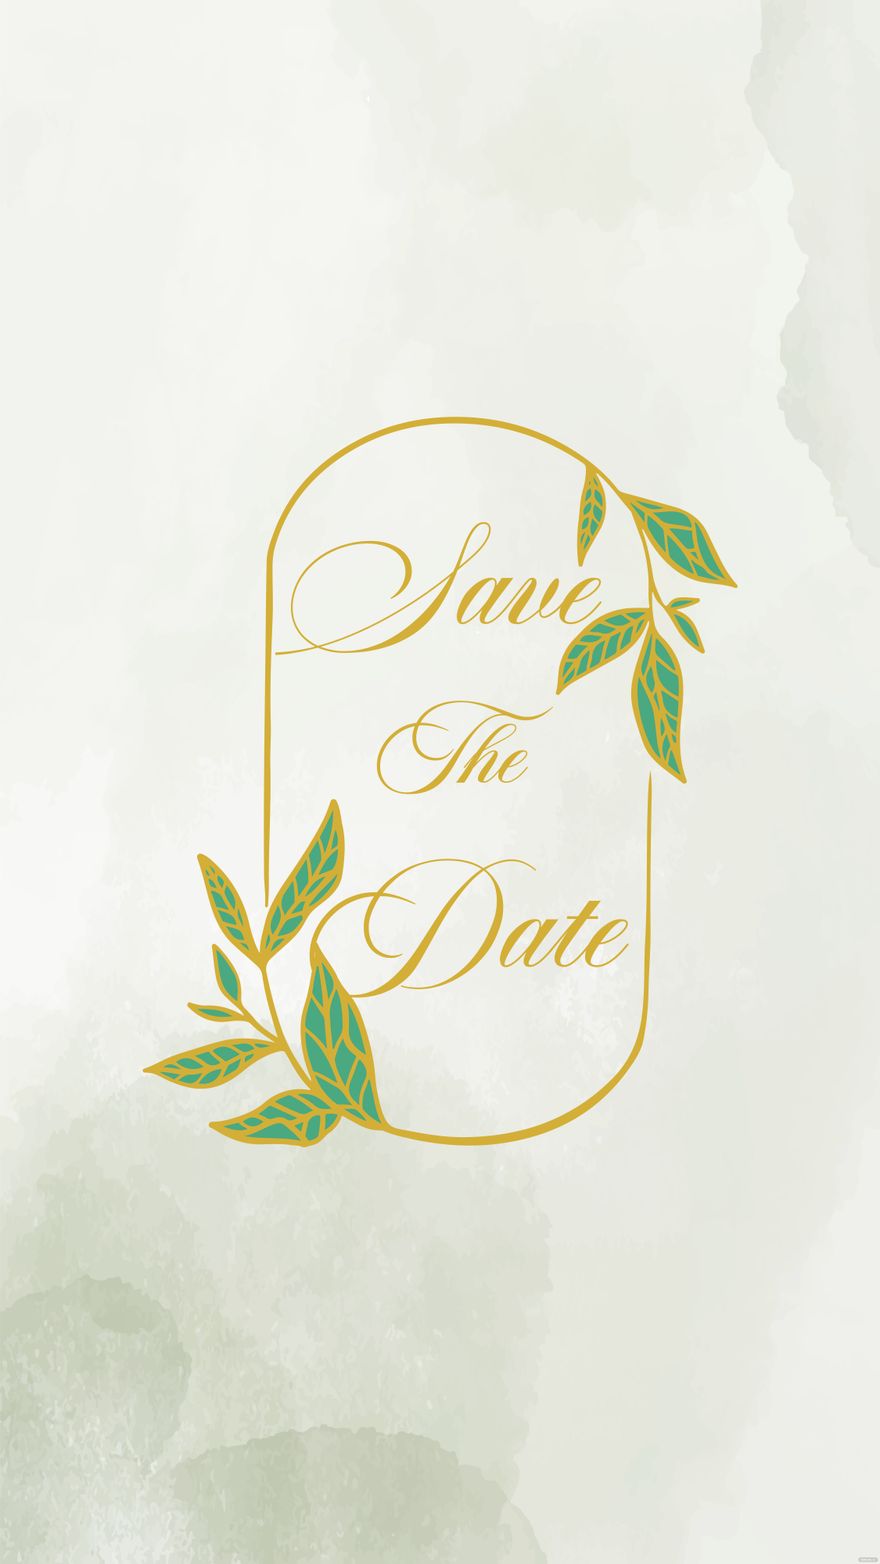 Free Save The Date Mobile Wallpaper in Illustrator, EPS, SVG, JPG, PNG